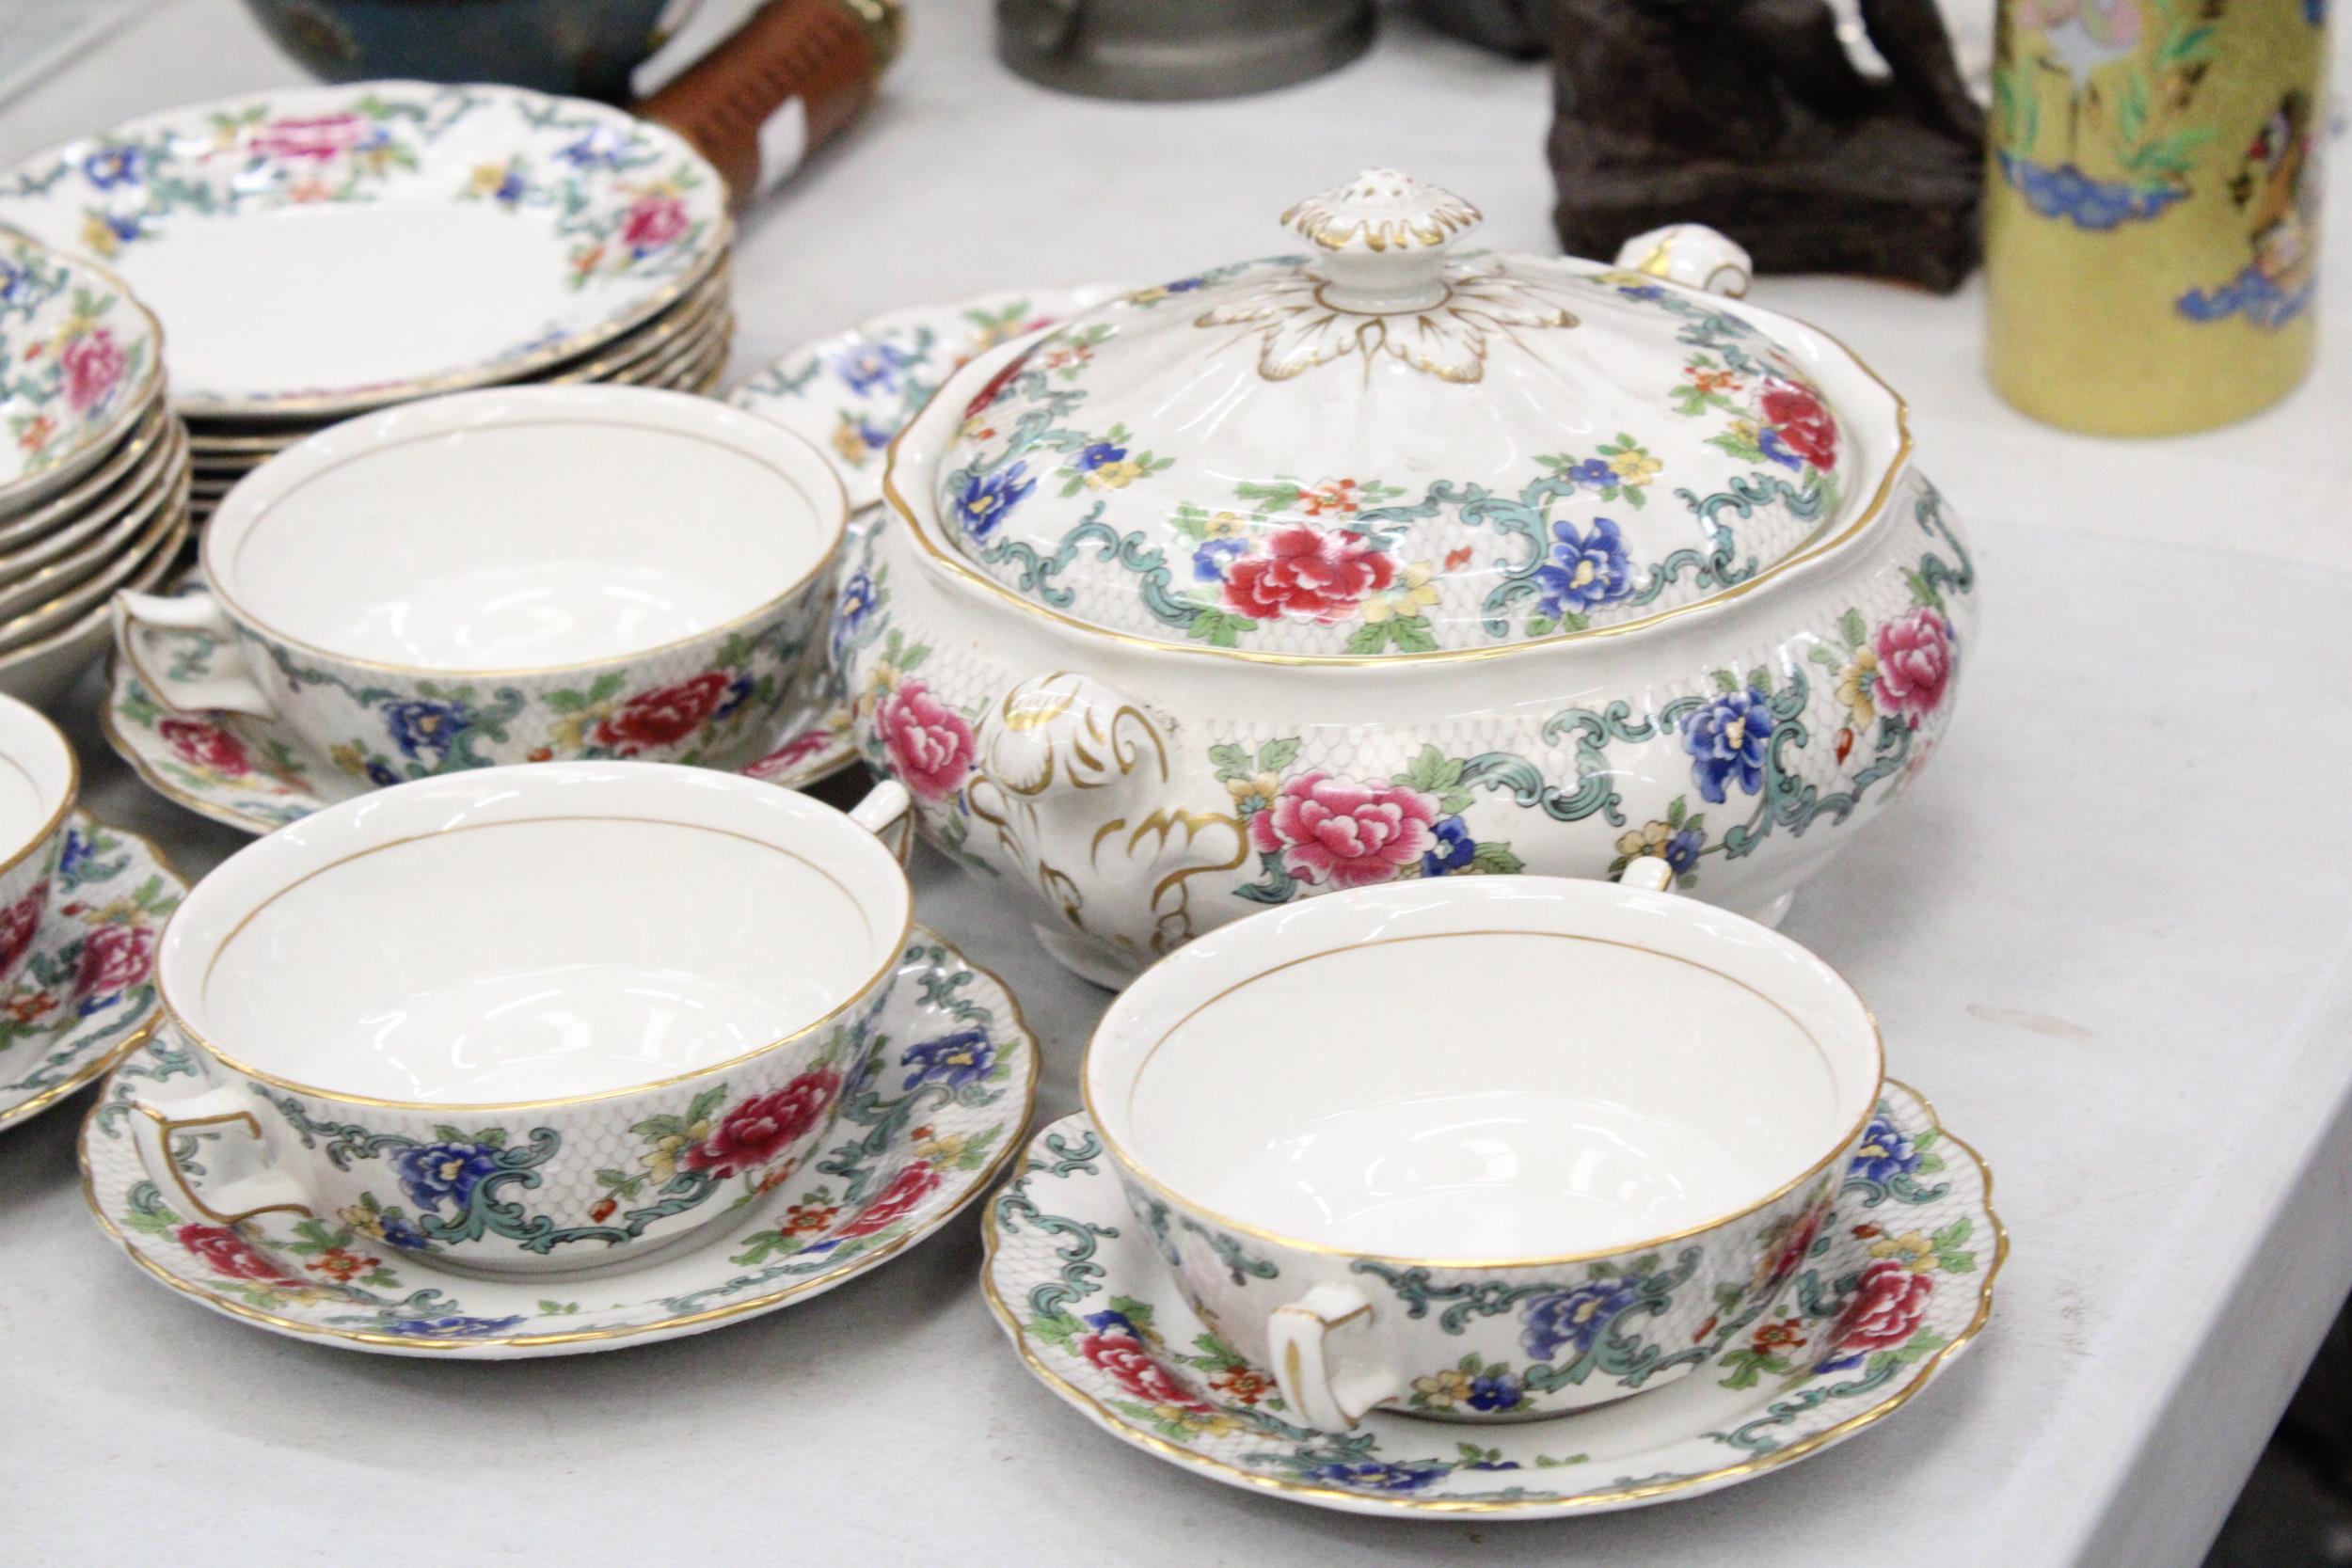 A FLORADORA BOOTHS DINNER SERVICE TO INCLUDE SOUP BOWLS, PLATES, TUREENS ETC - Image 3 of 5